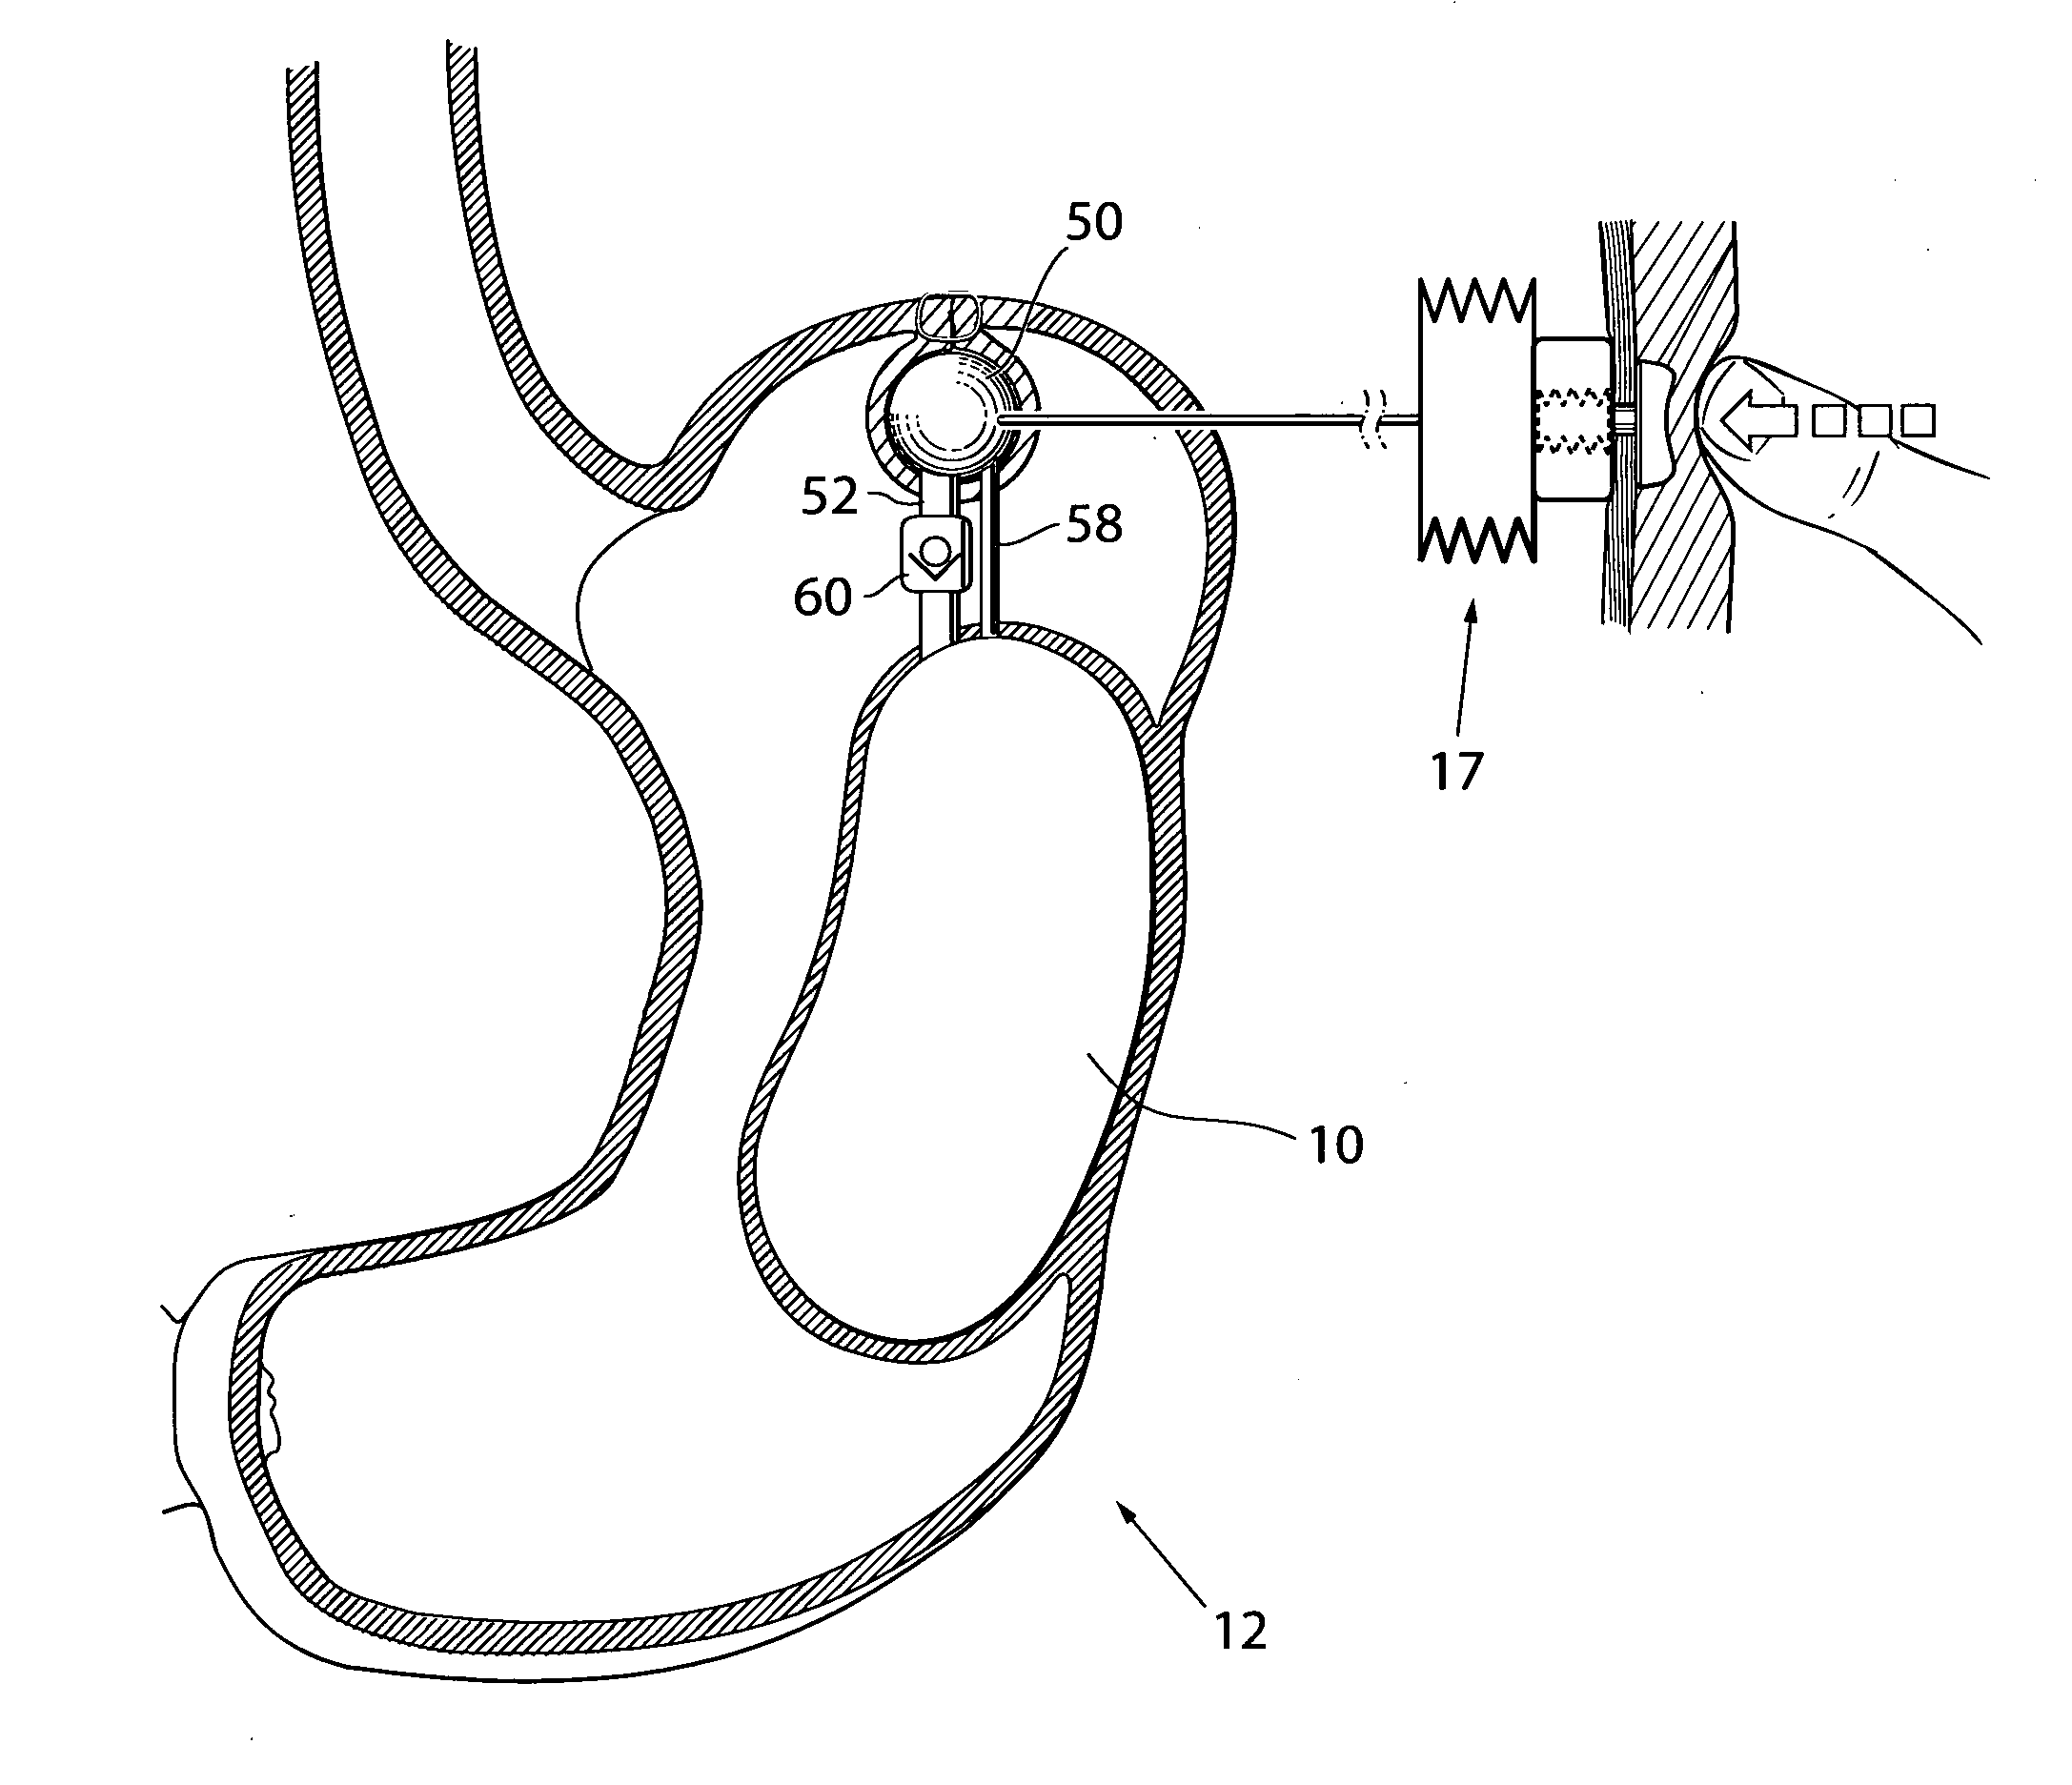 Apparatus for treating obesity